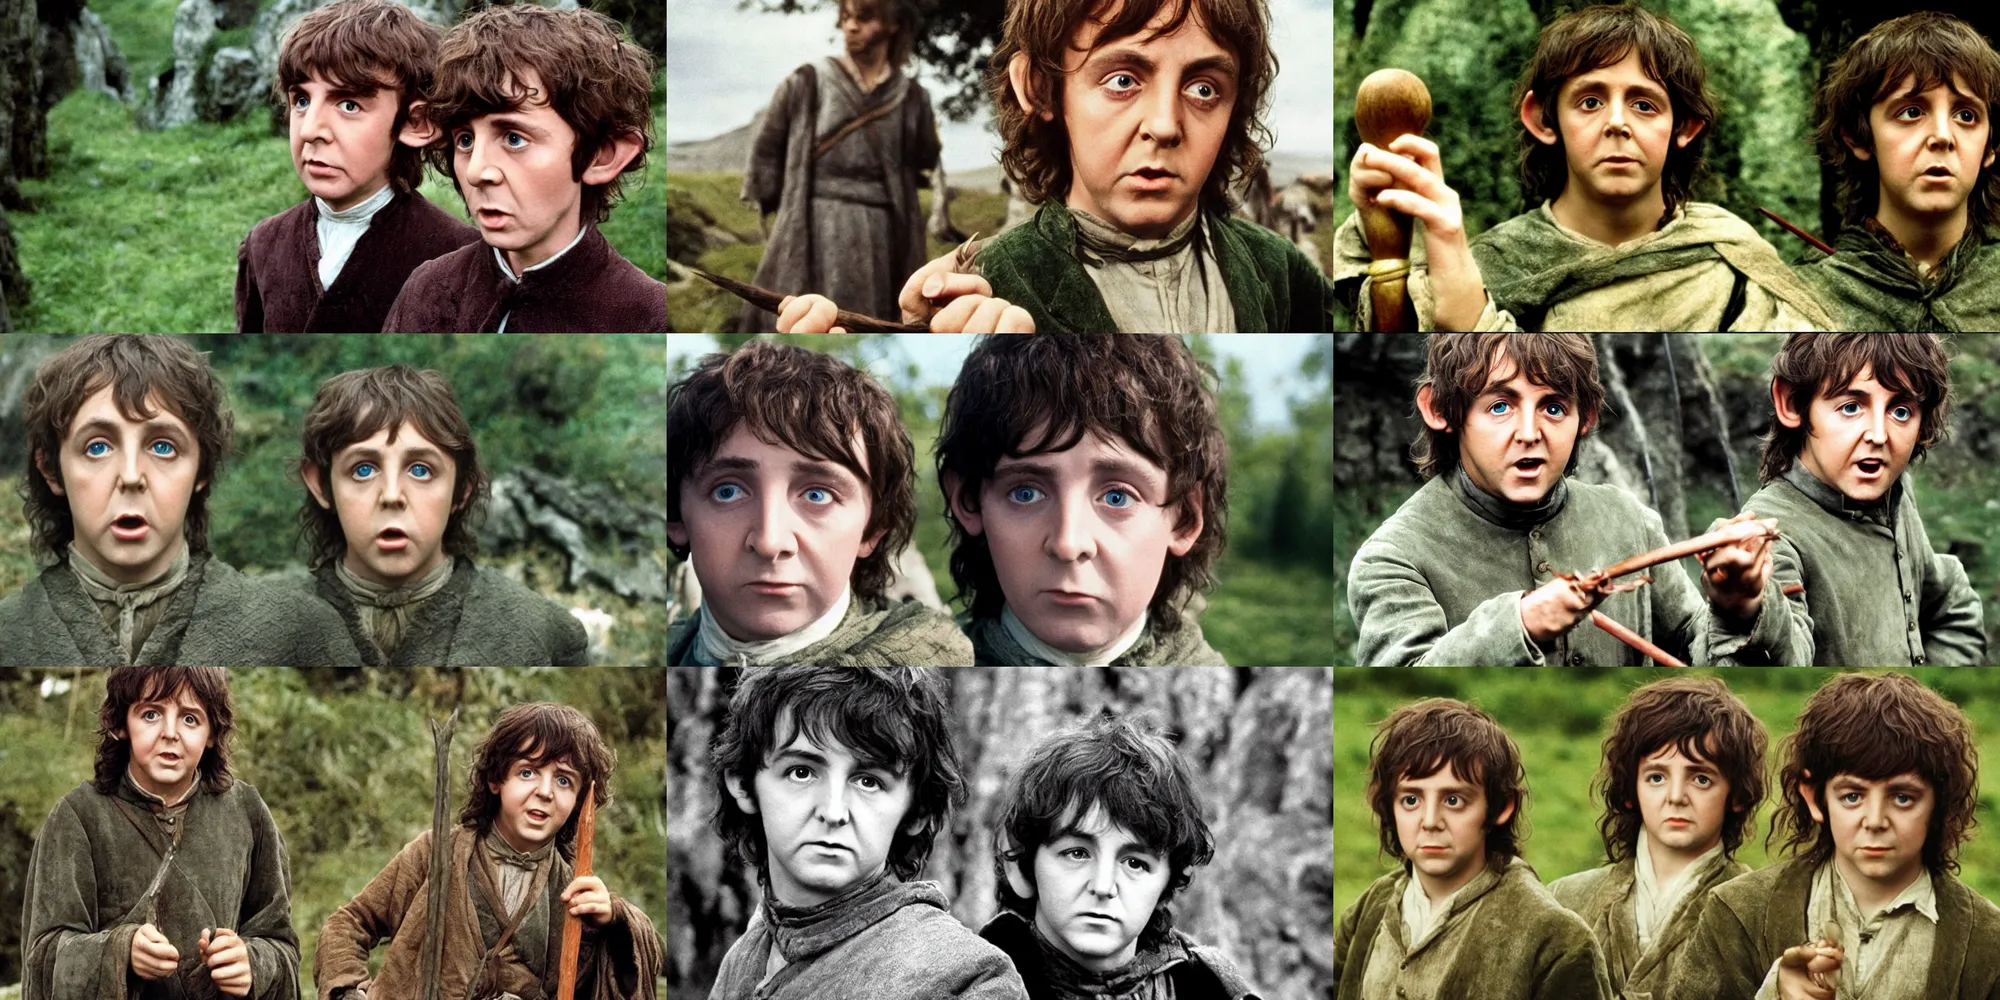 Prompt: A full color still of single person, young Paul McCartney in Hobbit makeup and costume, in The Lord of the Rings directed by Stanley Kubrick,